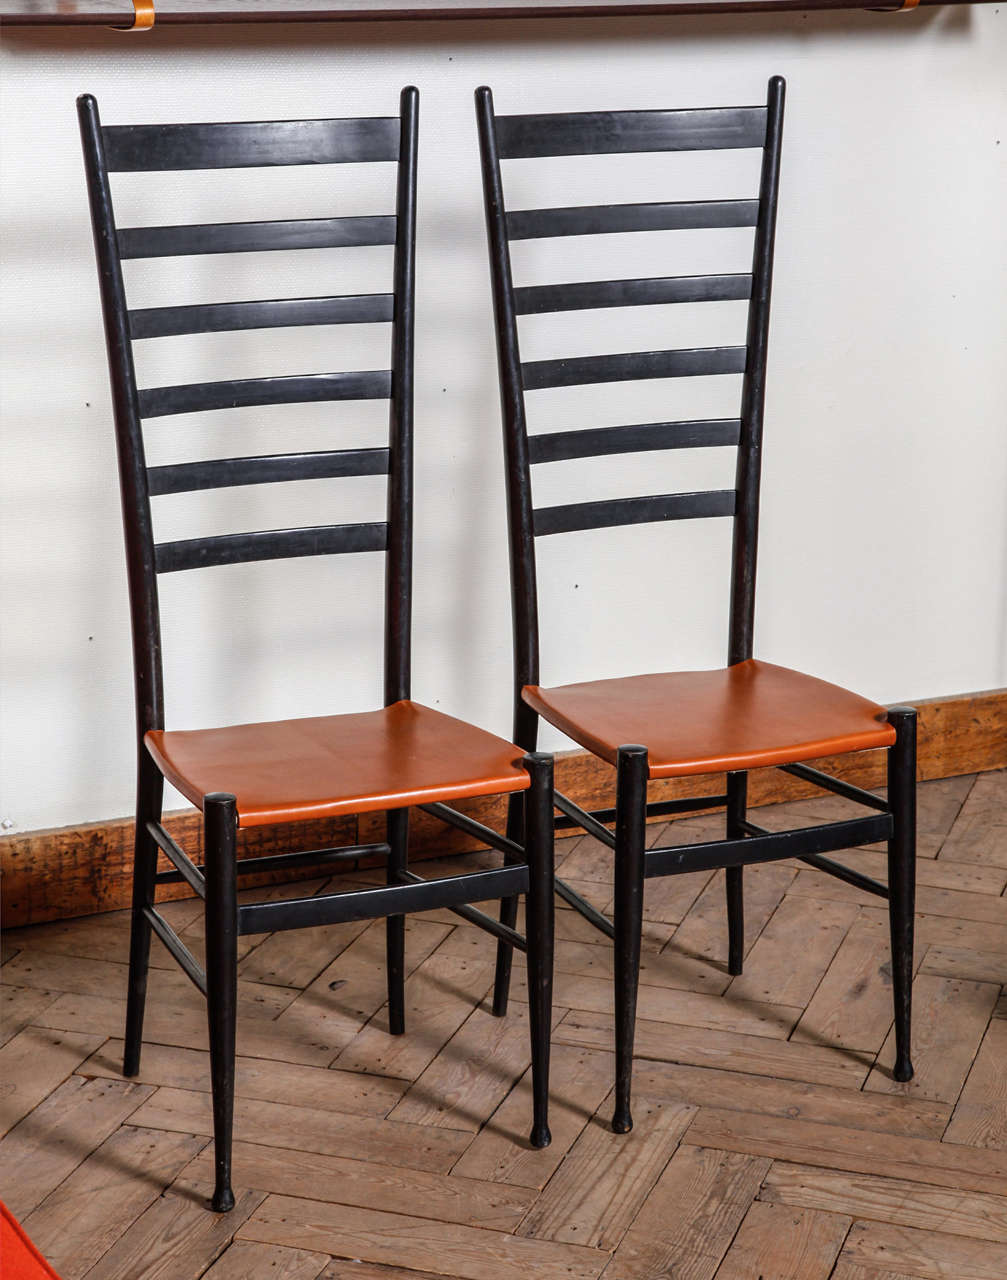 In the style of Gio Ponti

Pair of high back chairs

We offer affordable worldwide shipping. Feel free to inquire!